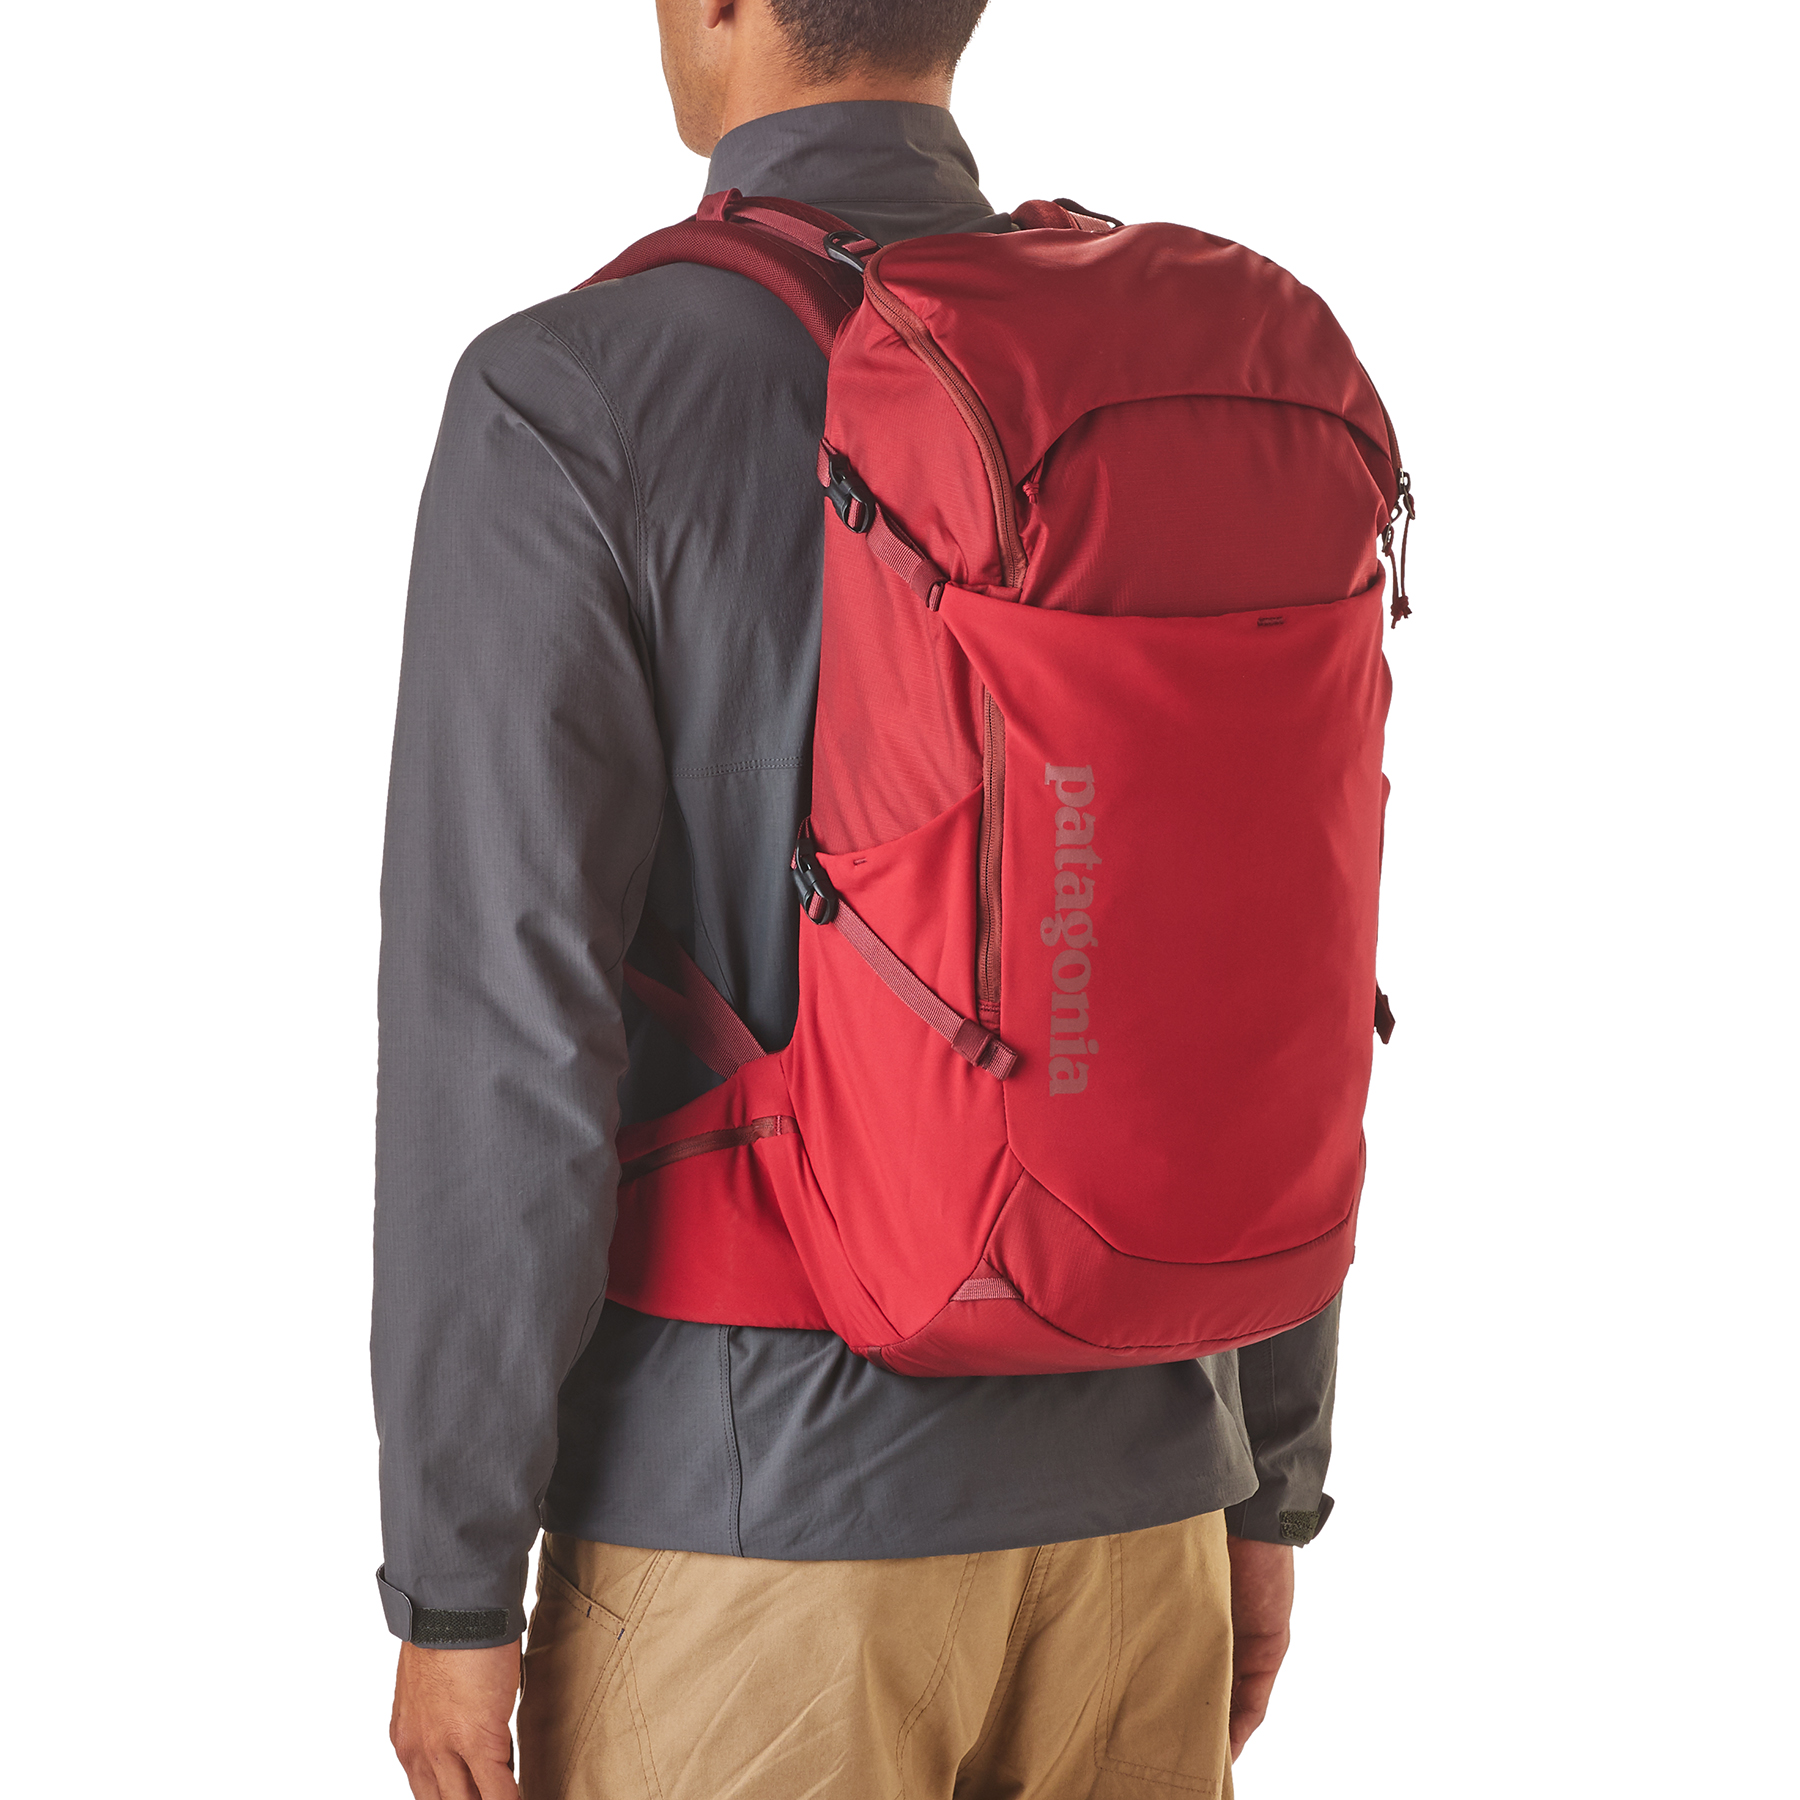 Patagonia Nine Trails Pack - 28L - Forge Grey | undefined | Huckberry